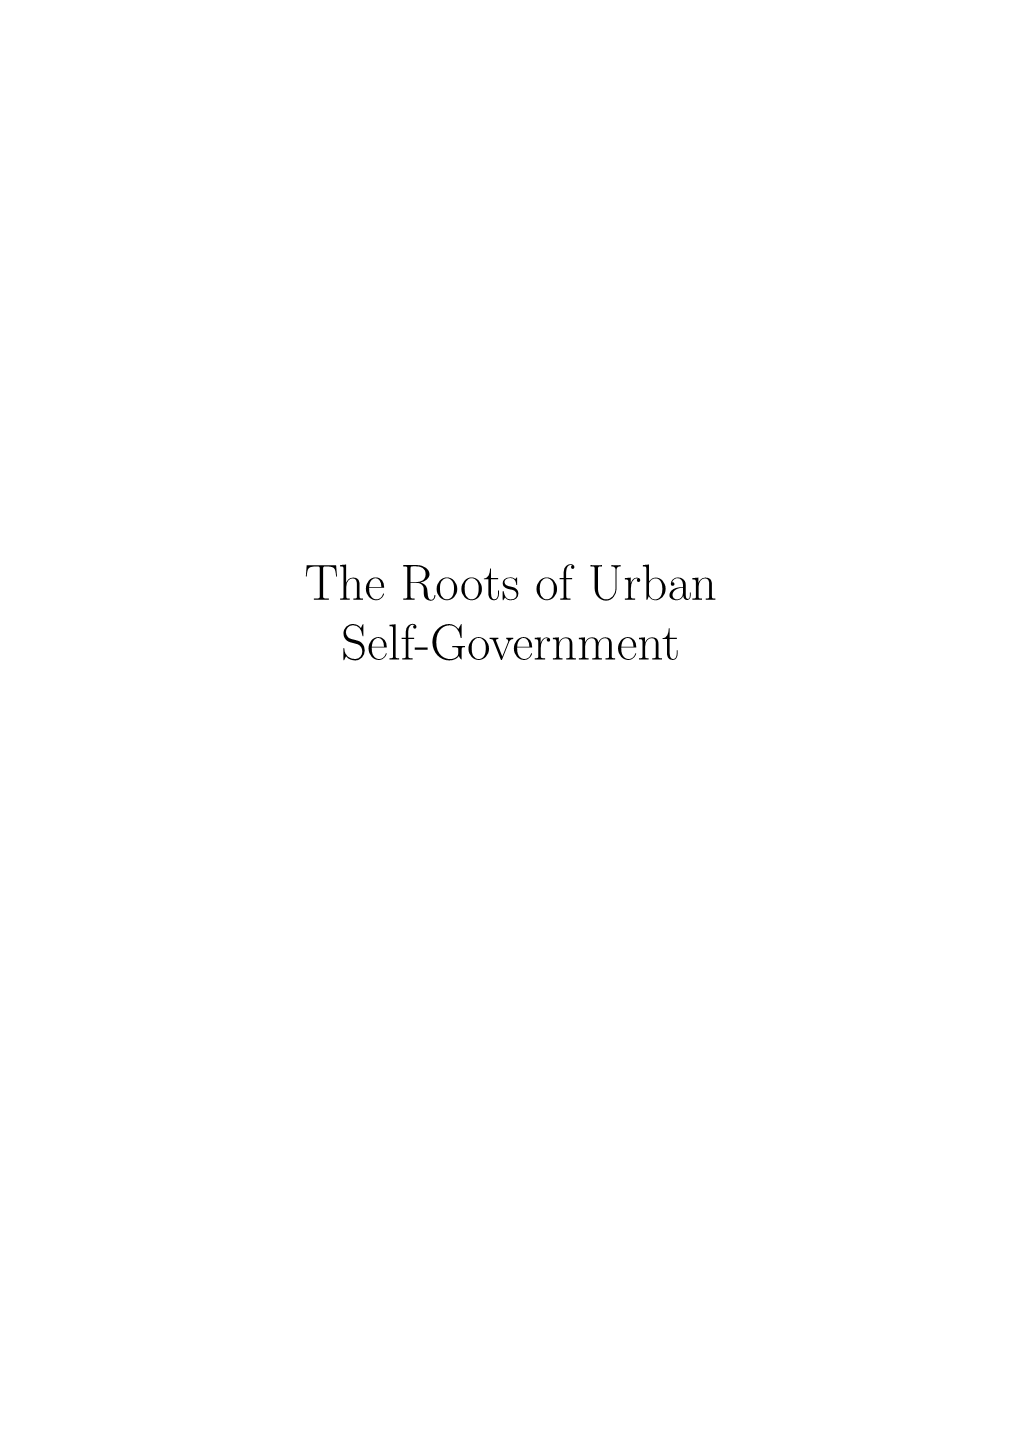 The Roots of Urban Self-Government